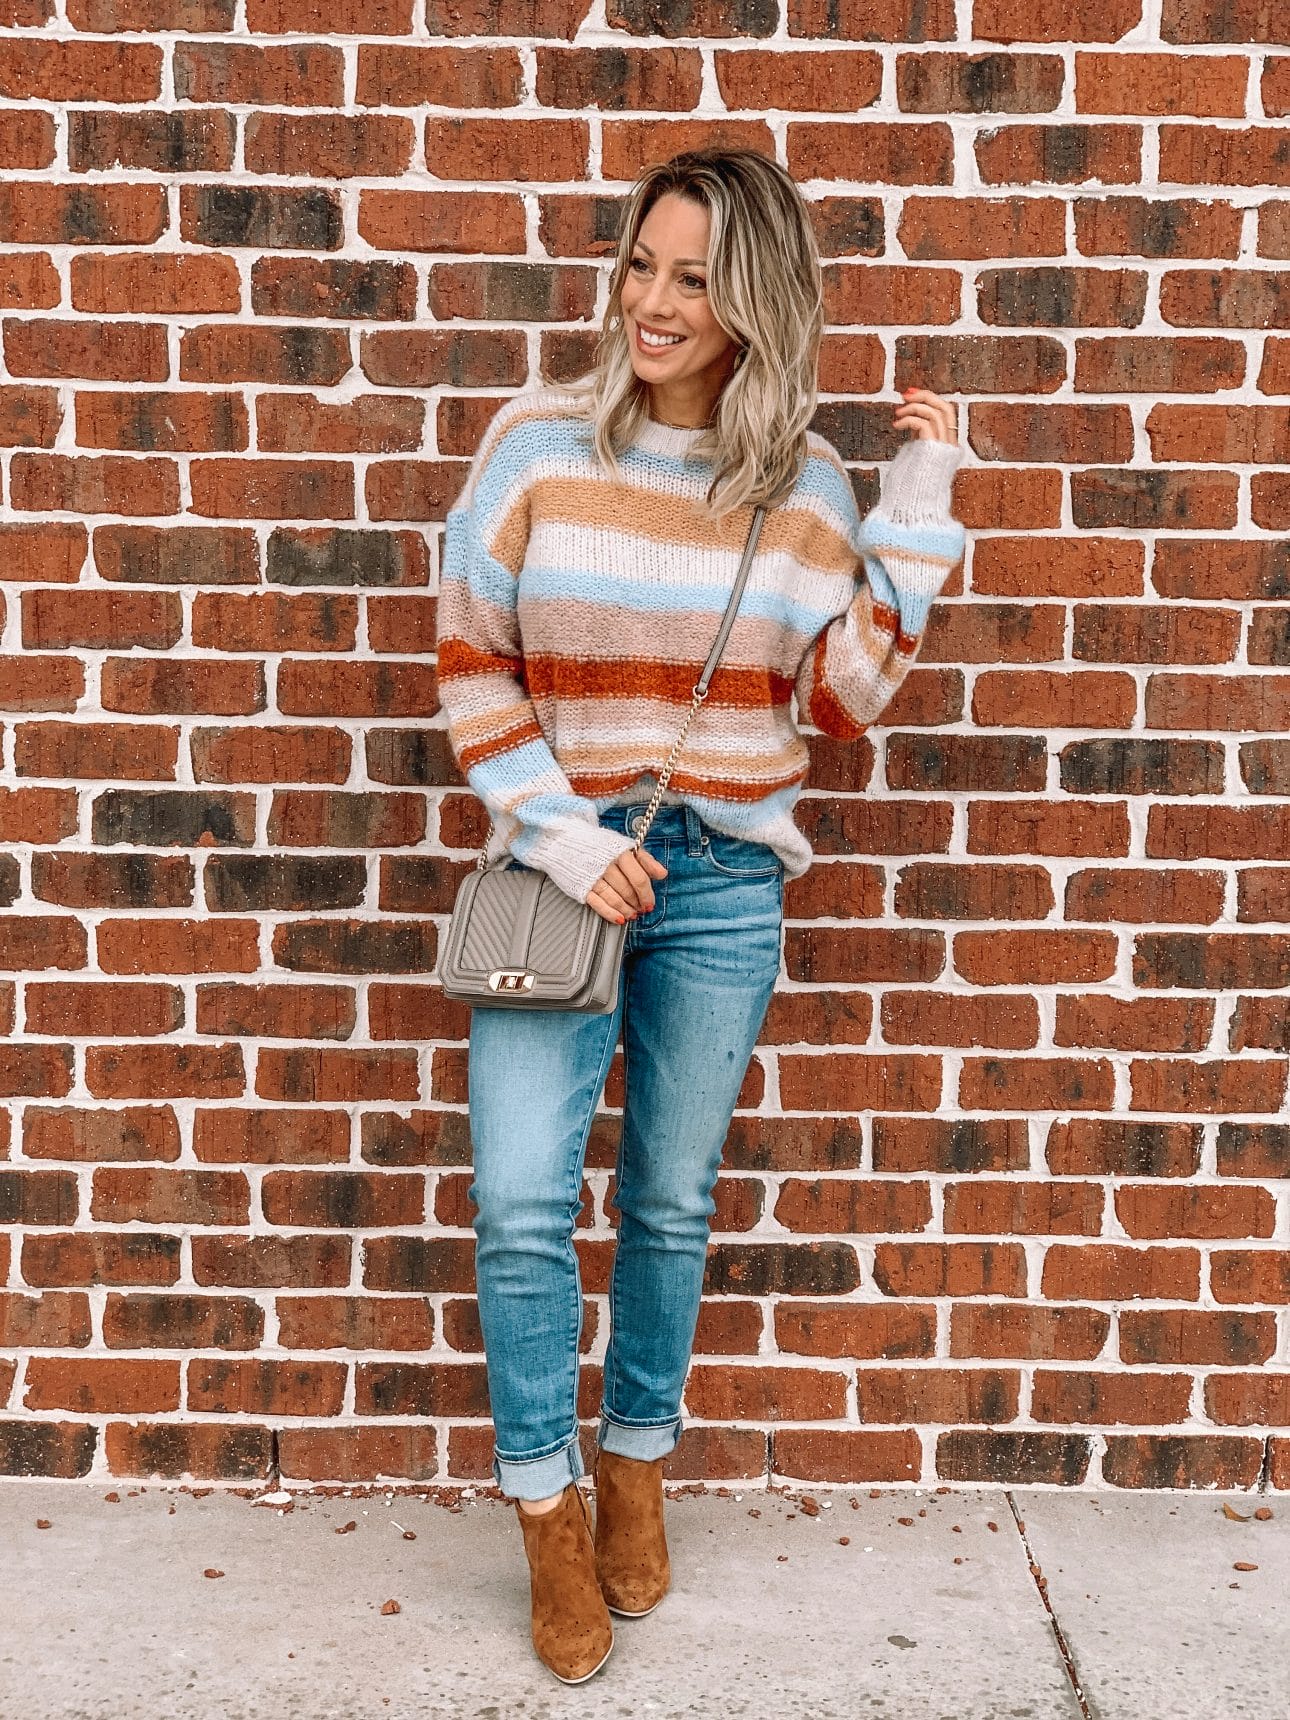 Jeans and striped sweater with booties